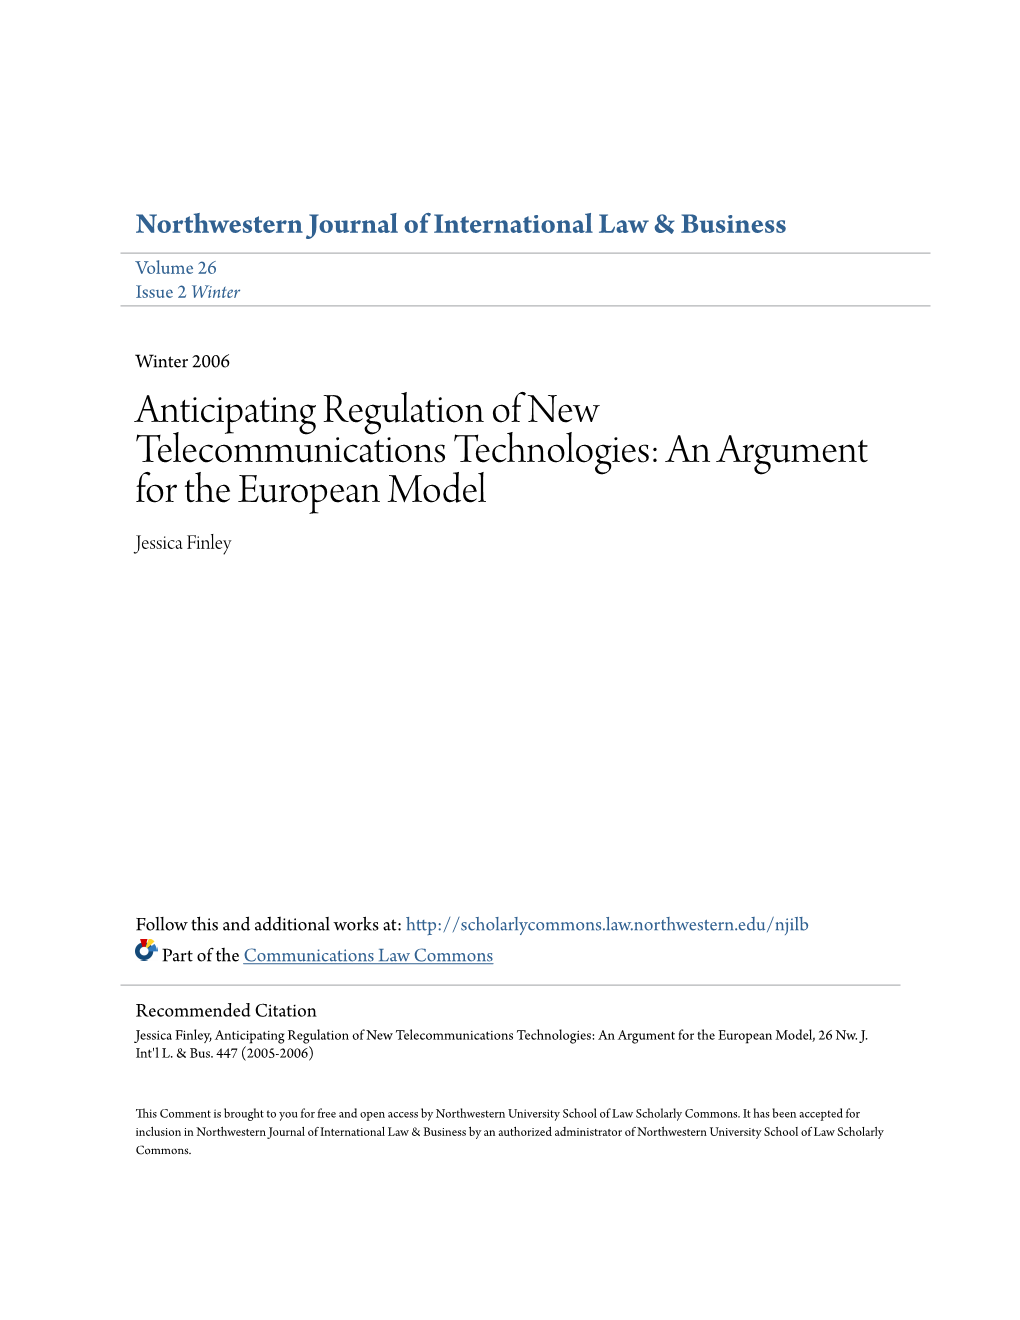 Anticipating Regulation of New Telecommunications Technologies: an Argument for the European Model Jessica Finley